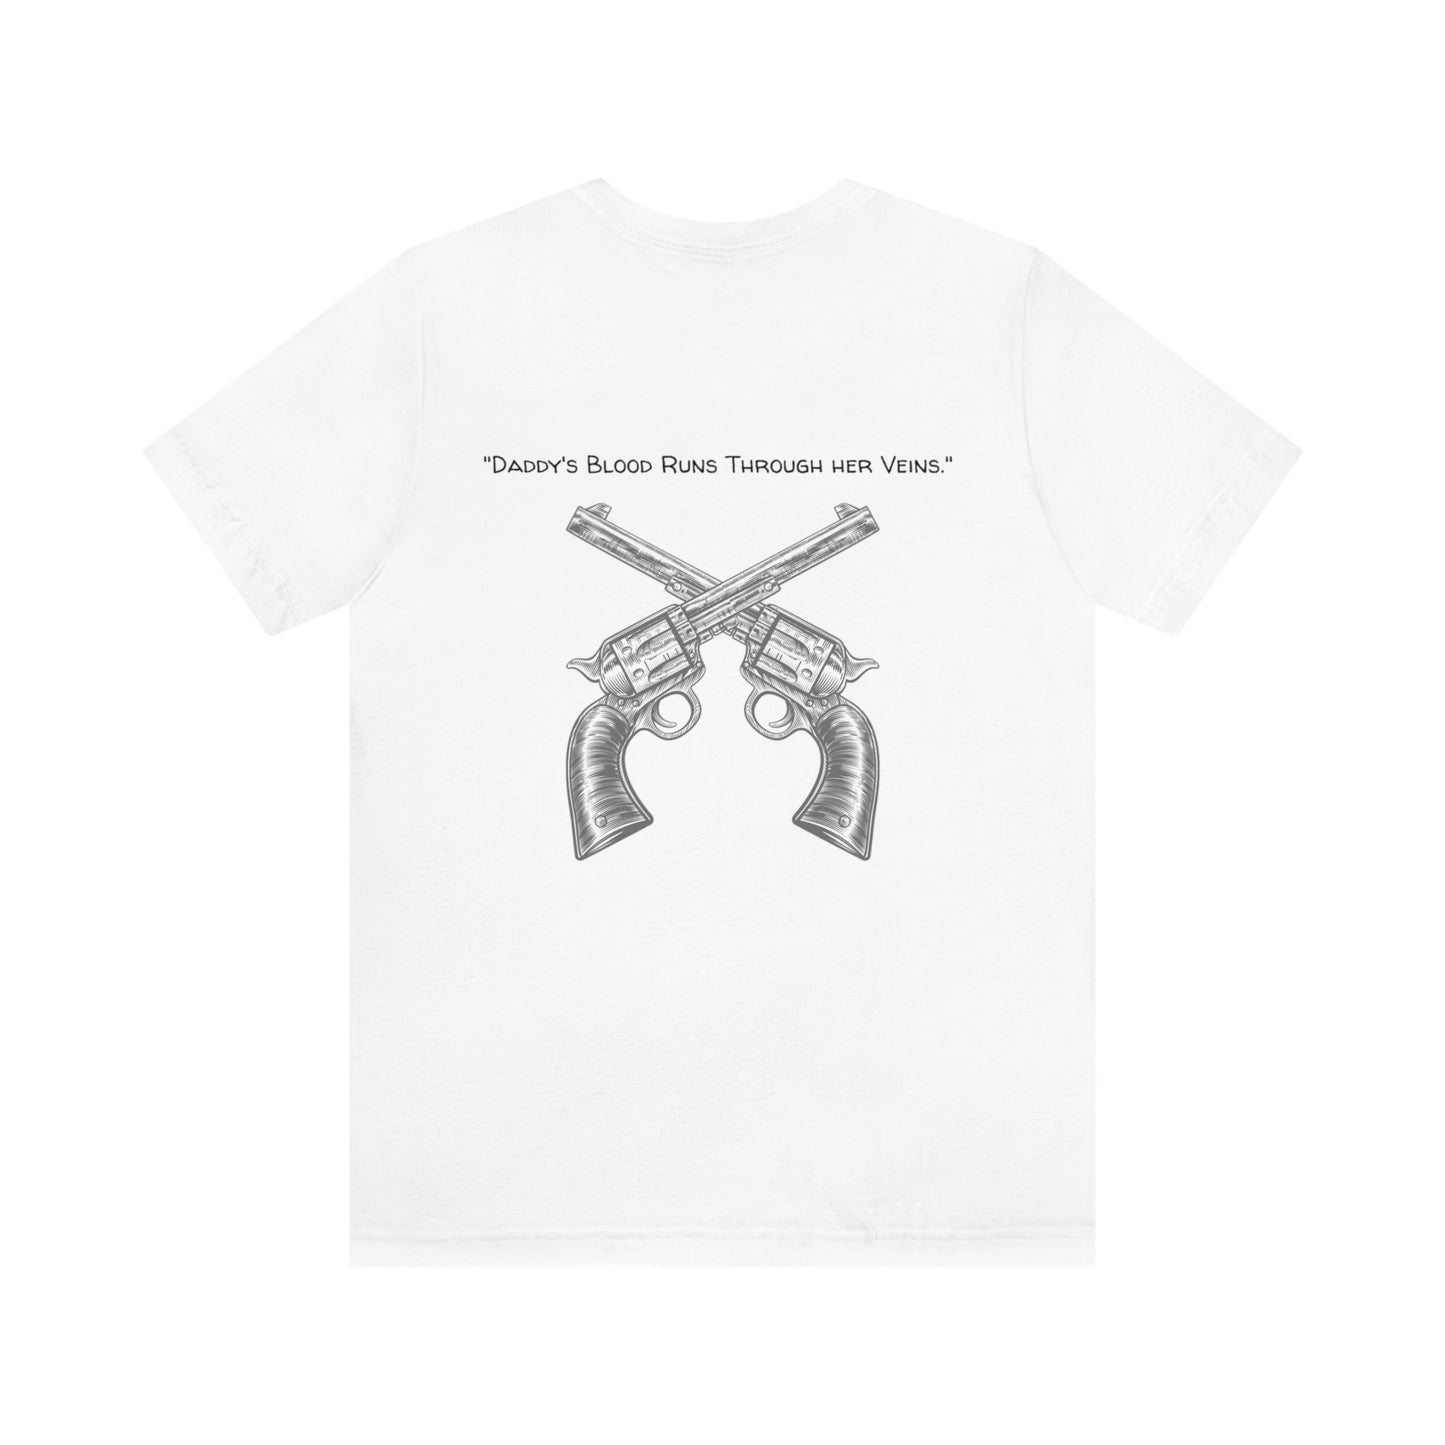 "Daughter of an Outlaw" Tee